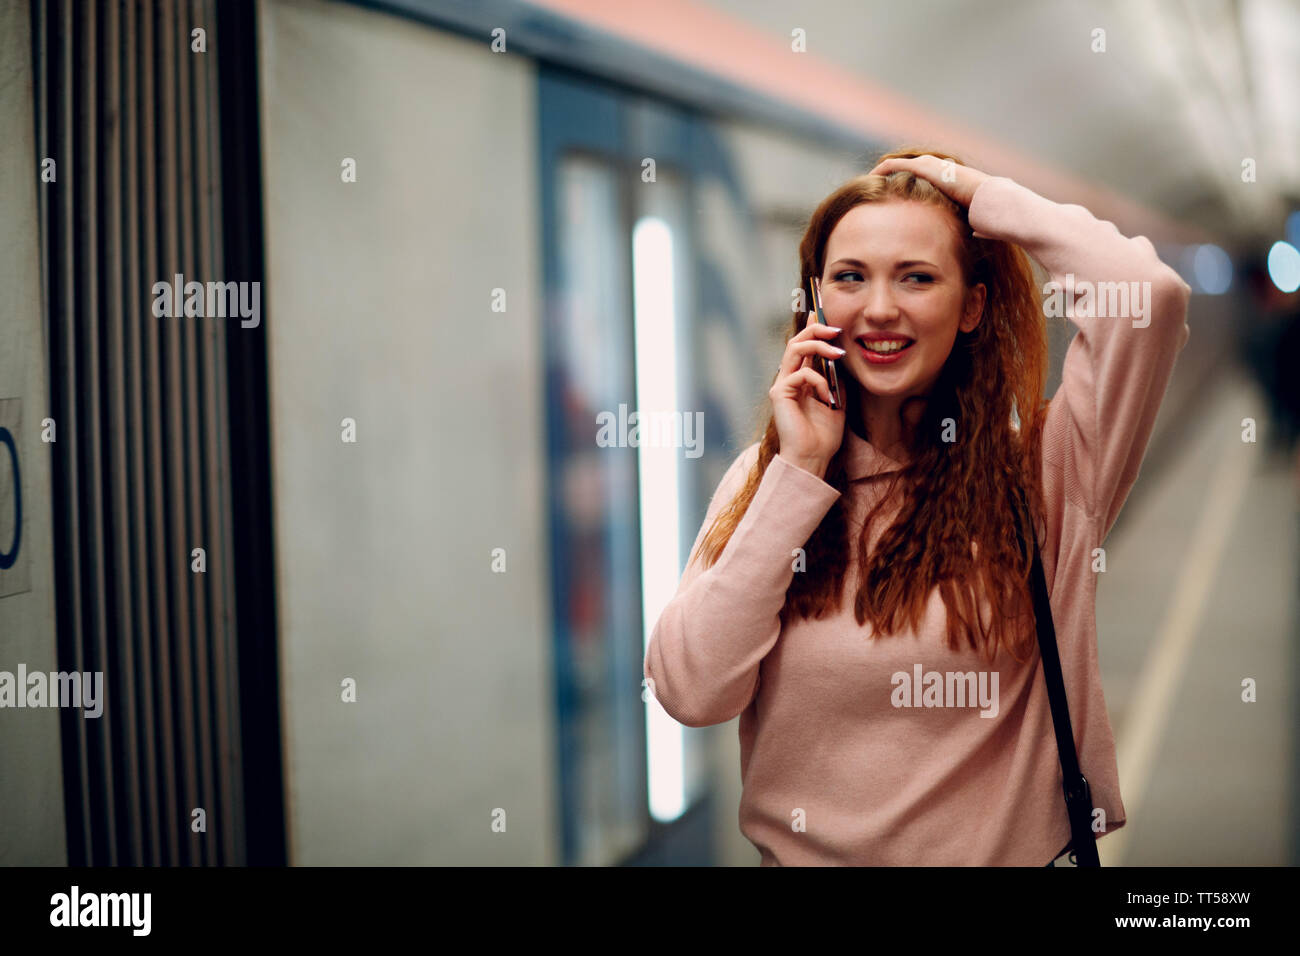 Positive redhead young female portrait. Moscow metro. Stock Photo